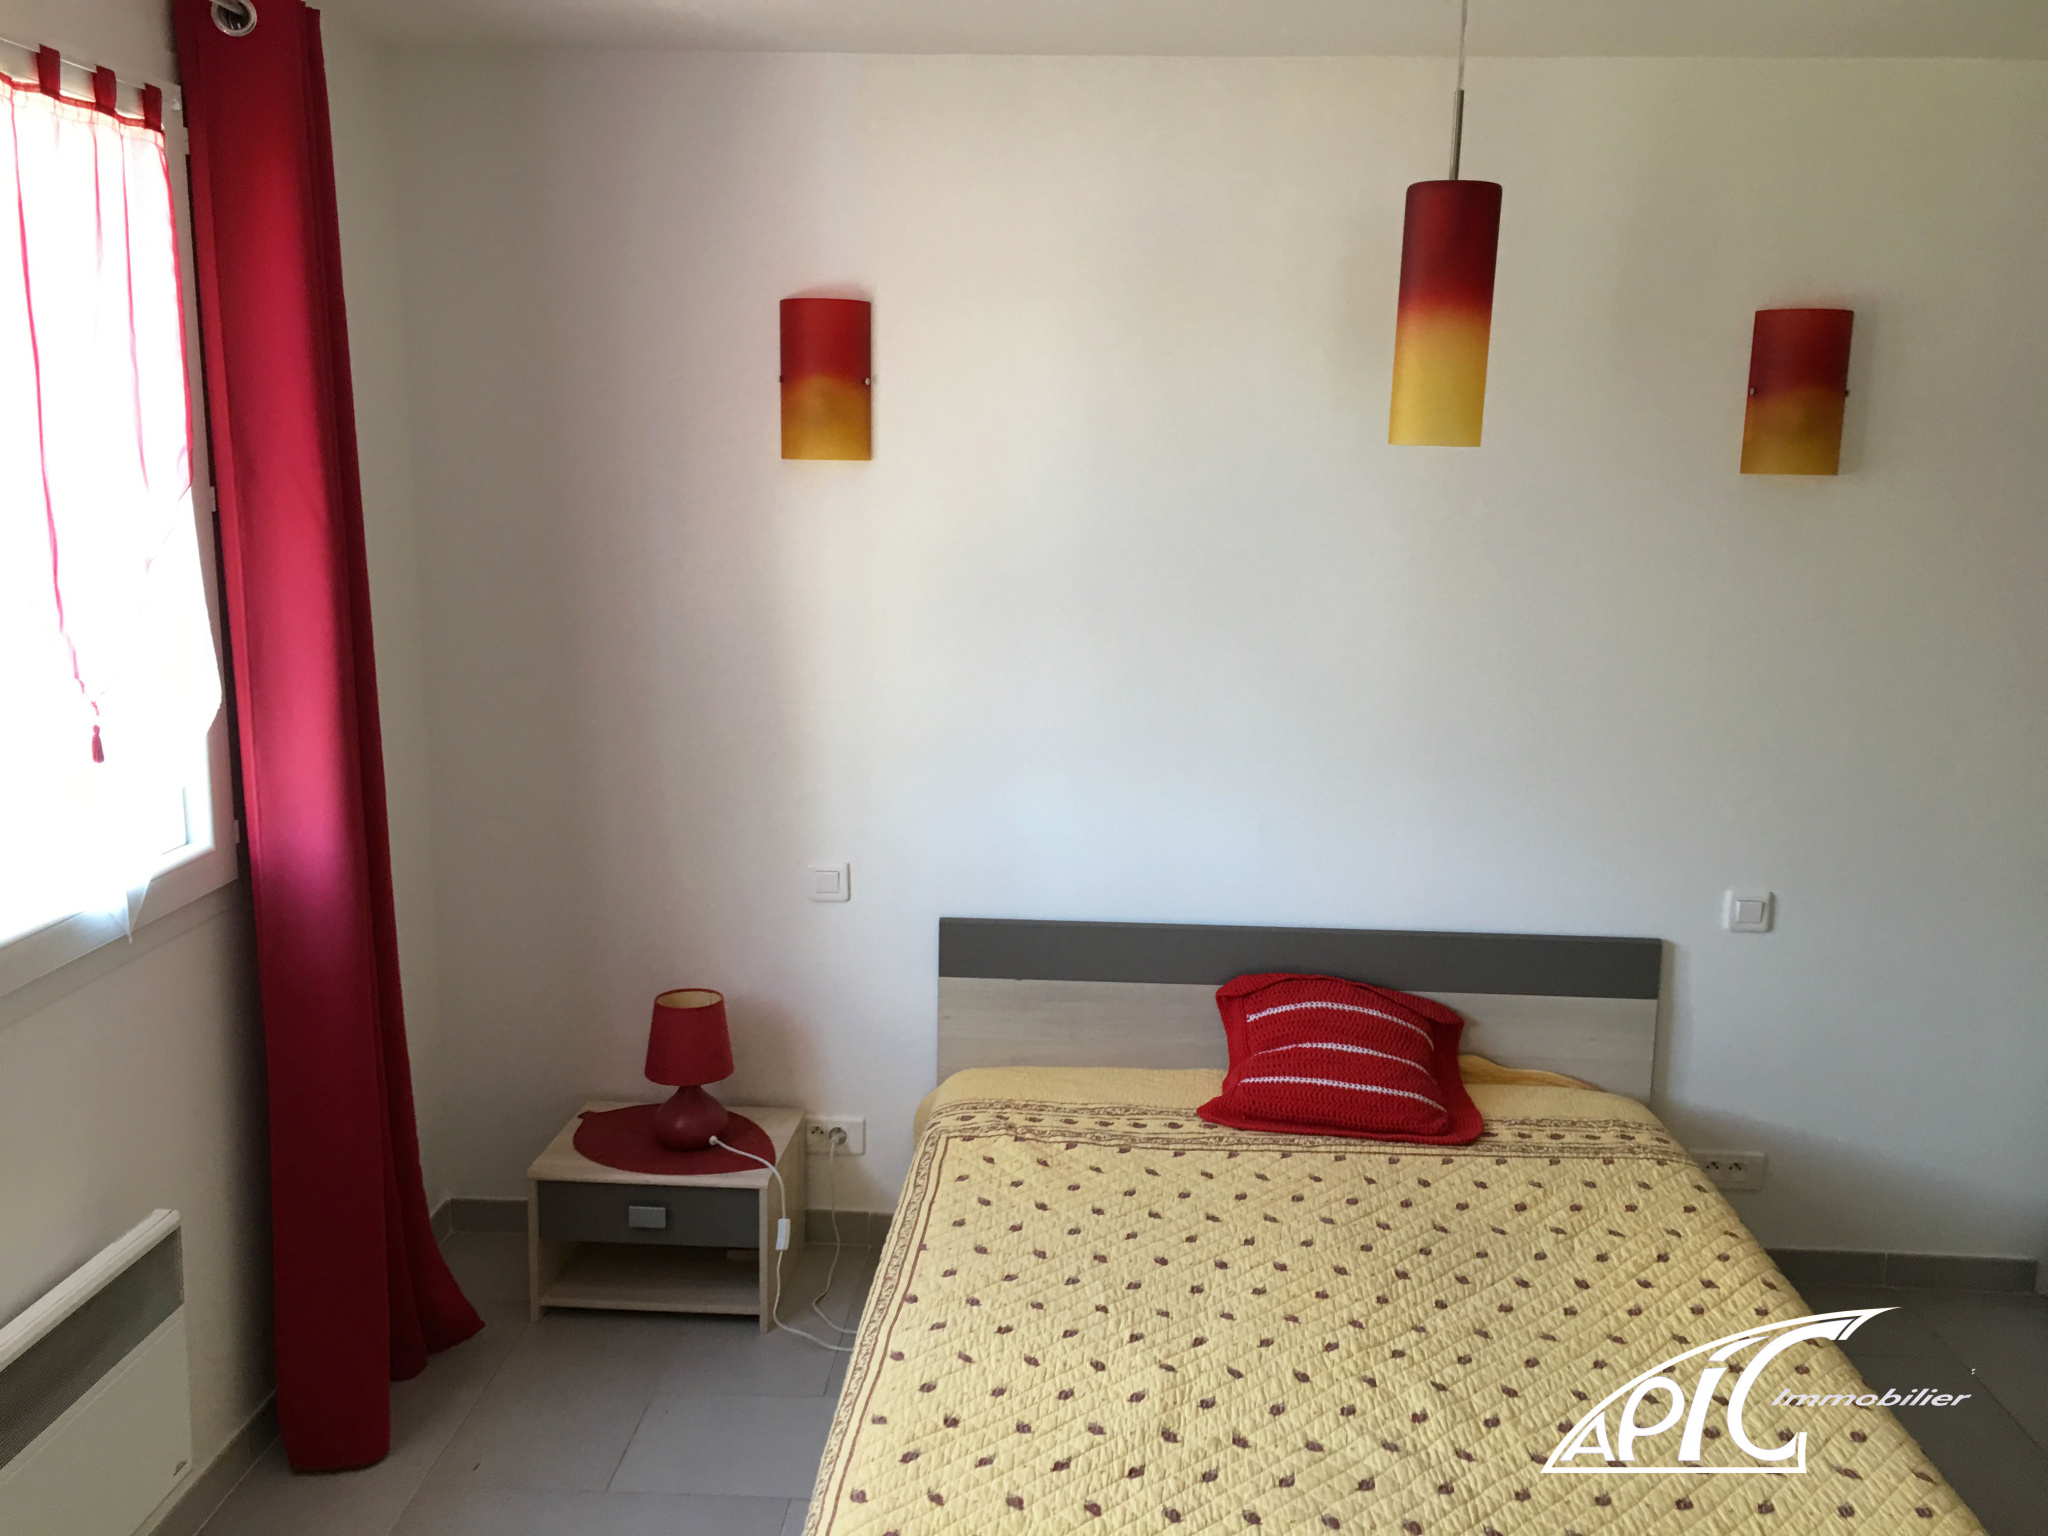 CHAMBRE APPARTEMENT